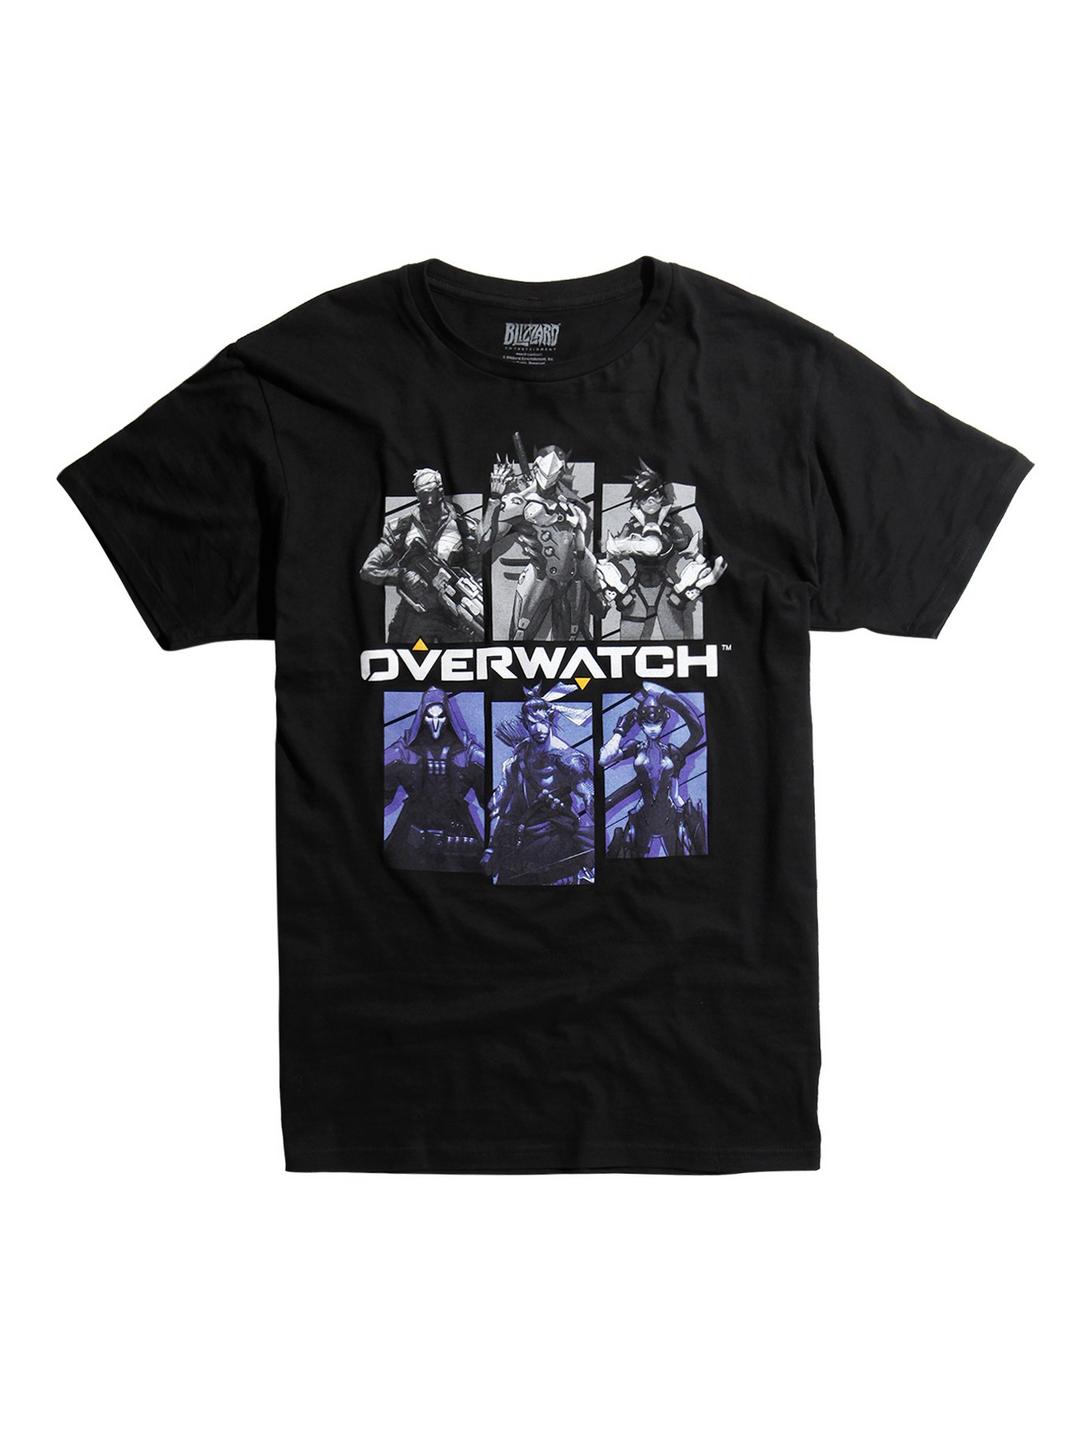 Overwatch Bring Your Friends T-Shirt, BLACK, hi-res